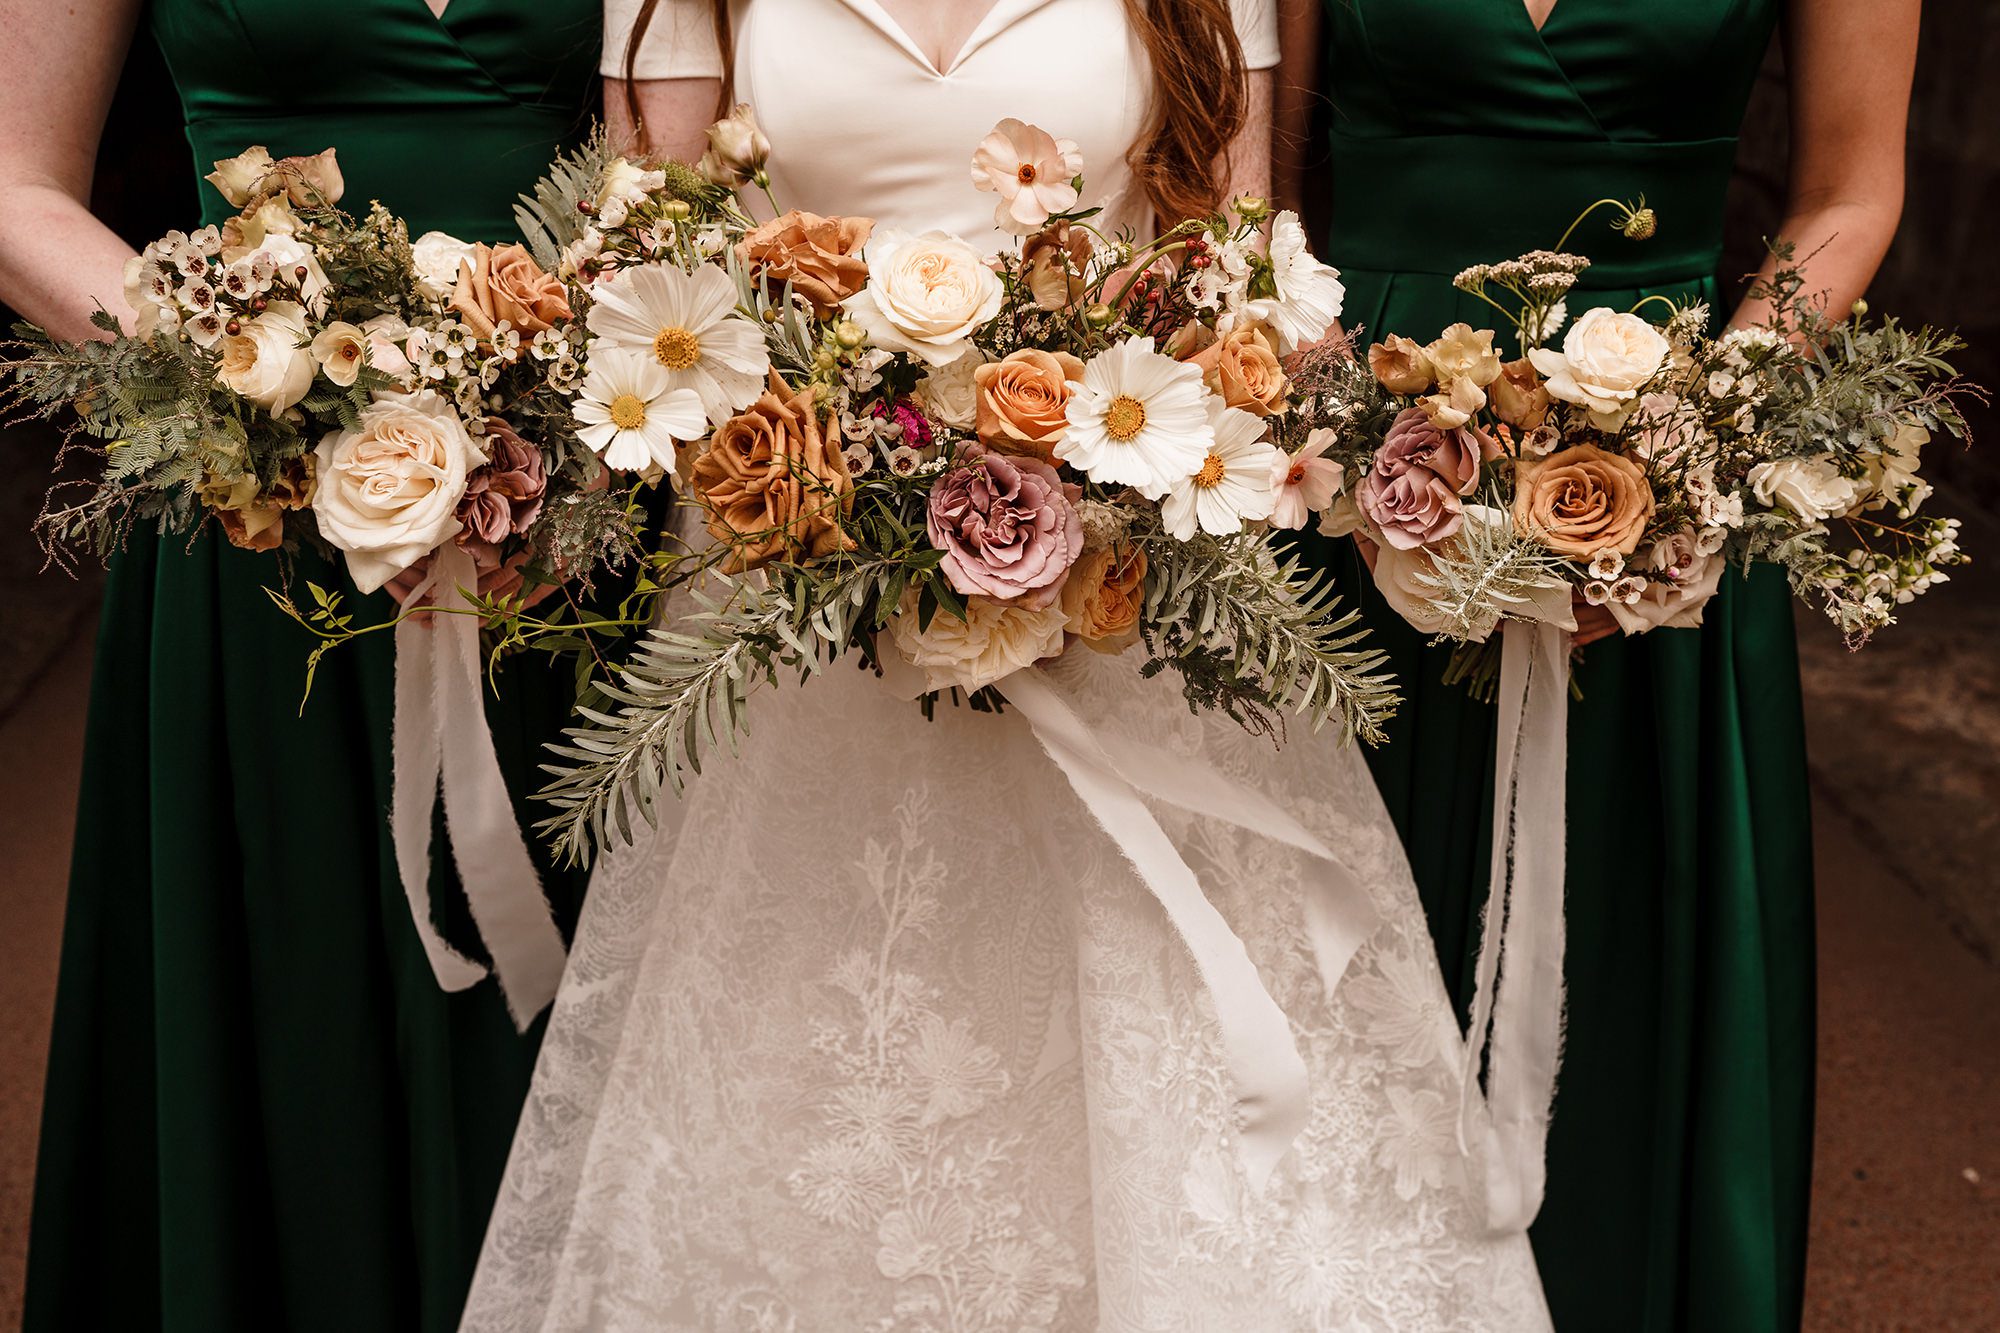 the brides and her bridesmaids flowers bunches together